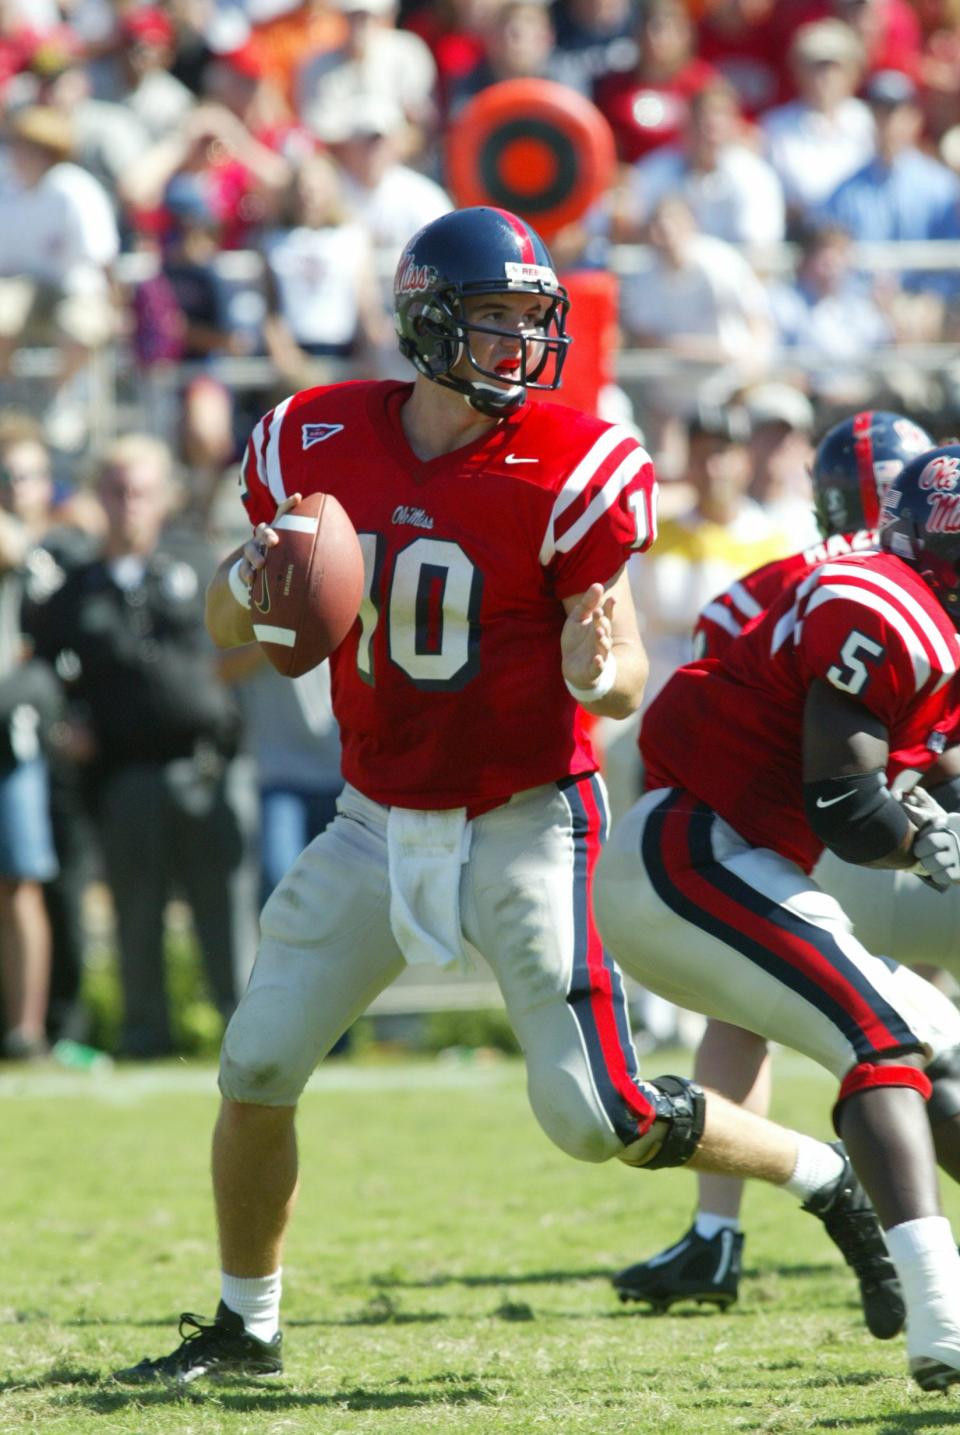 Former Ole Miss quarterback Eli Manning gets ready to throw in his college days with the Rebels.